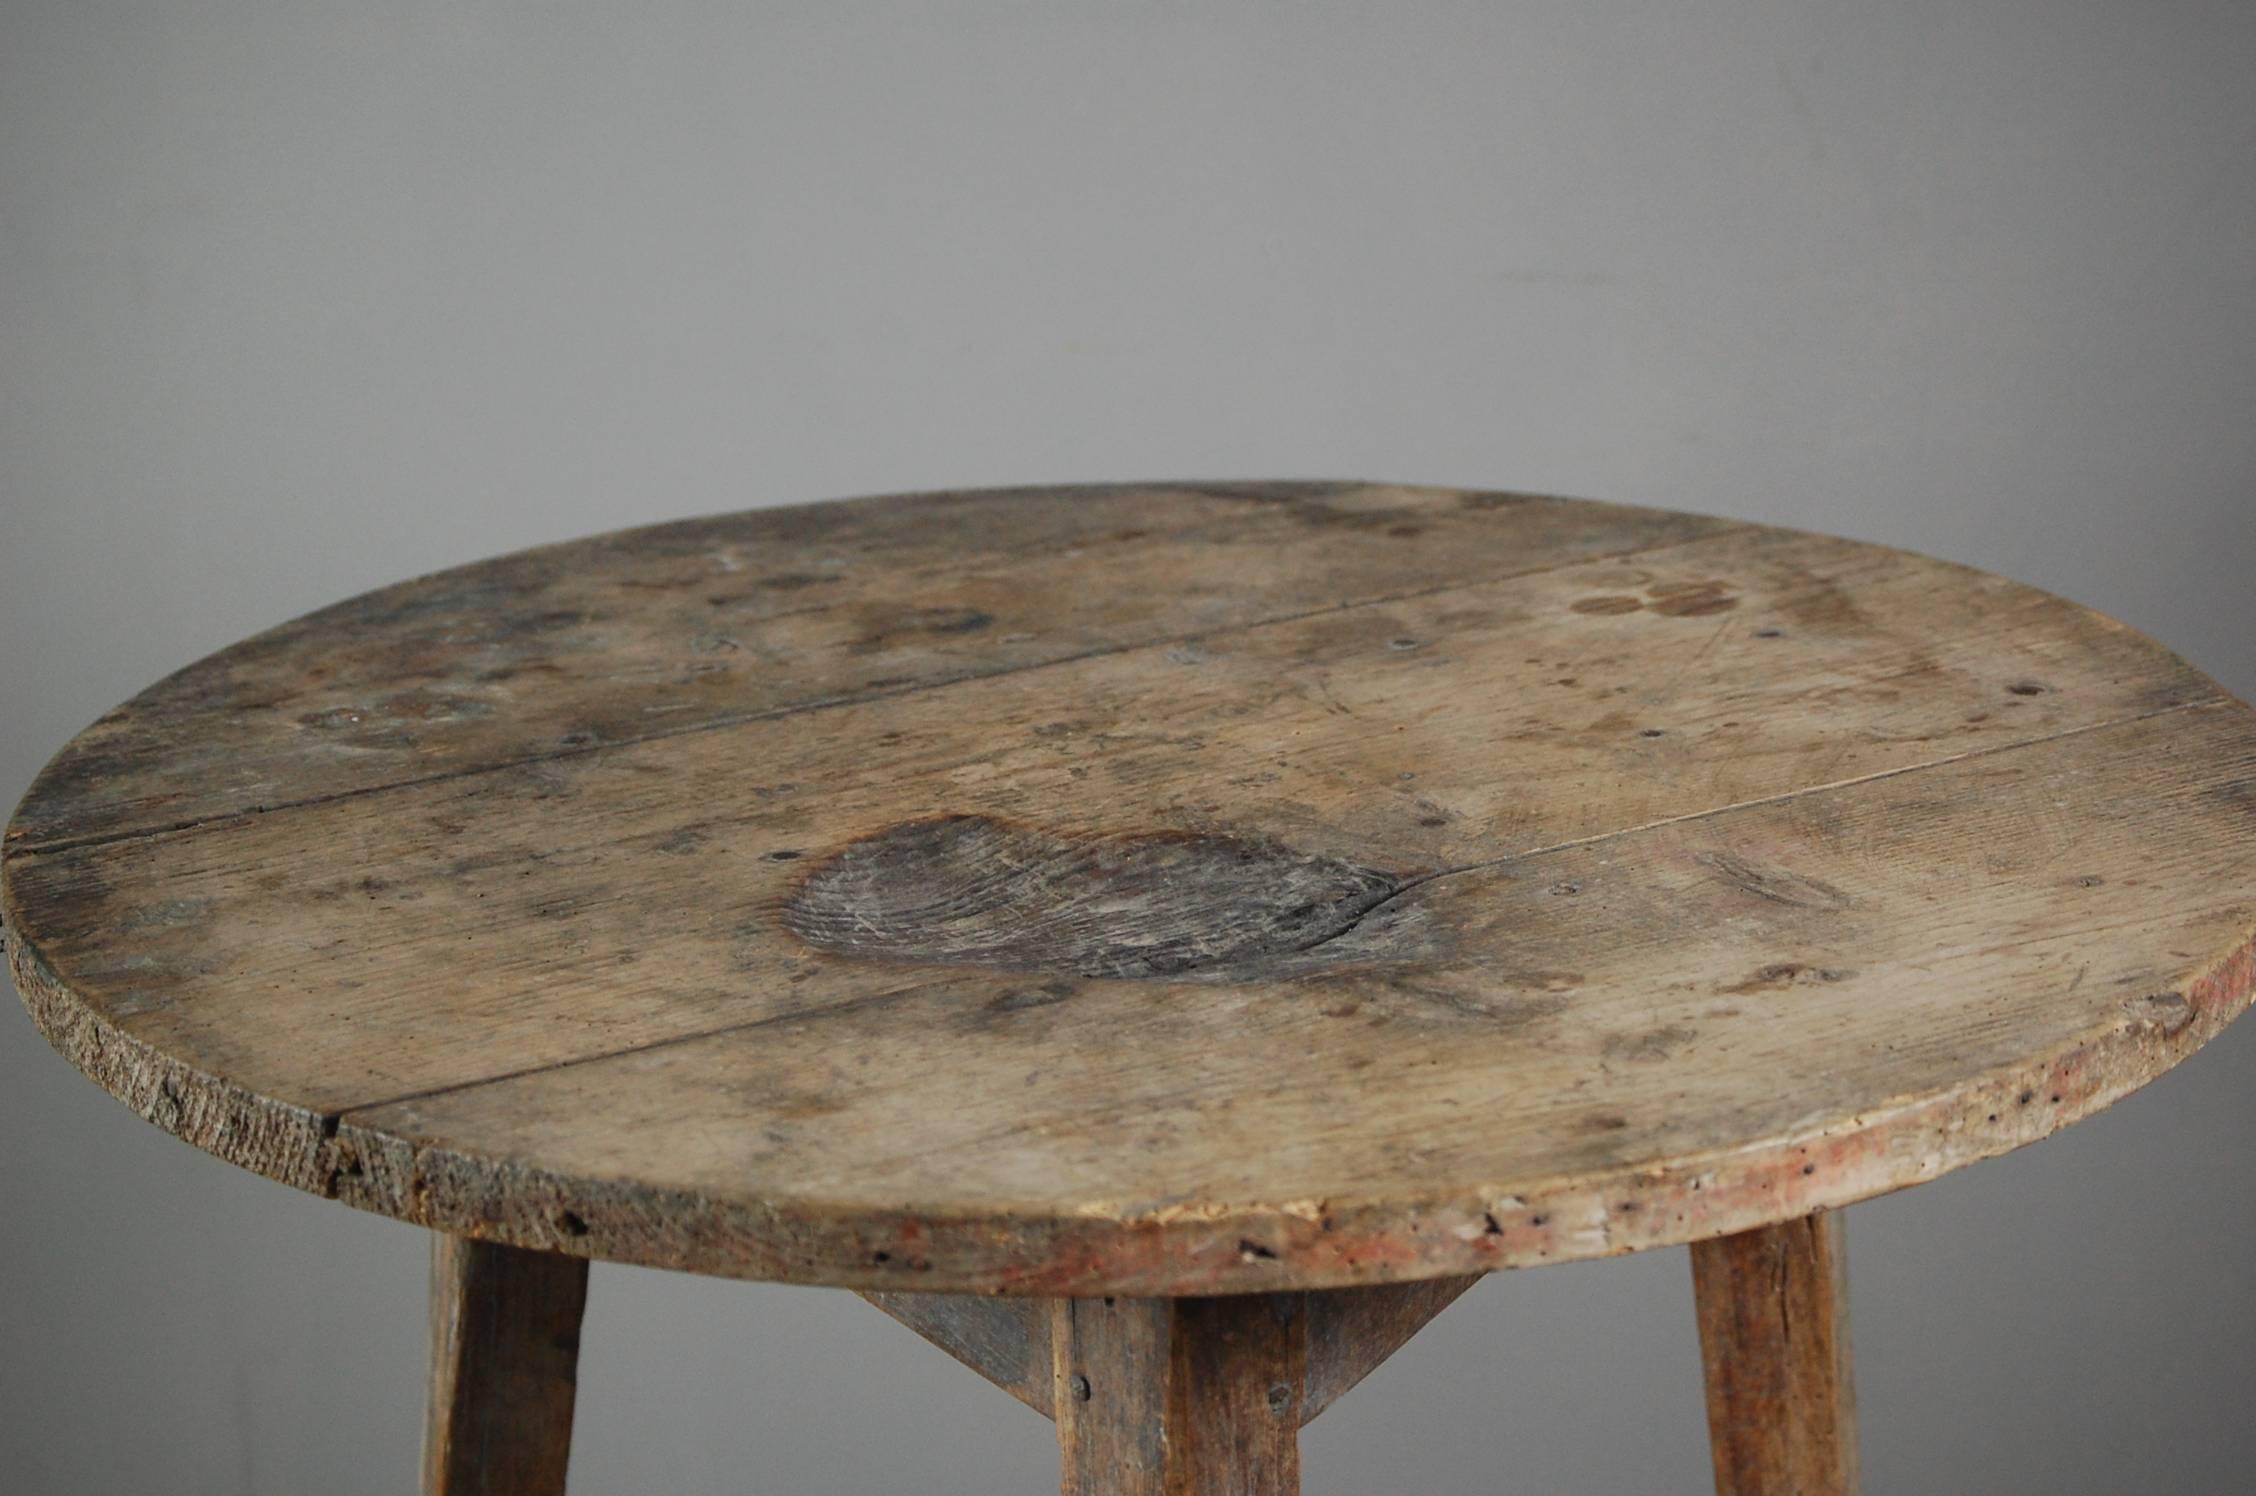 Late 19th century pine tavern cricket table, untouched dry finish, with burn mark to the surface no doubt from an oil lamp spill. Honest original piece.